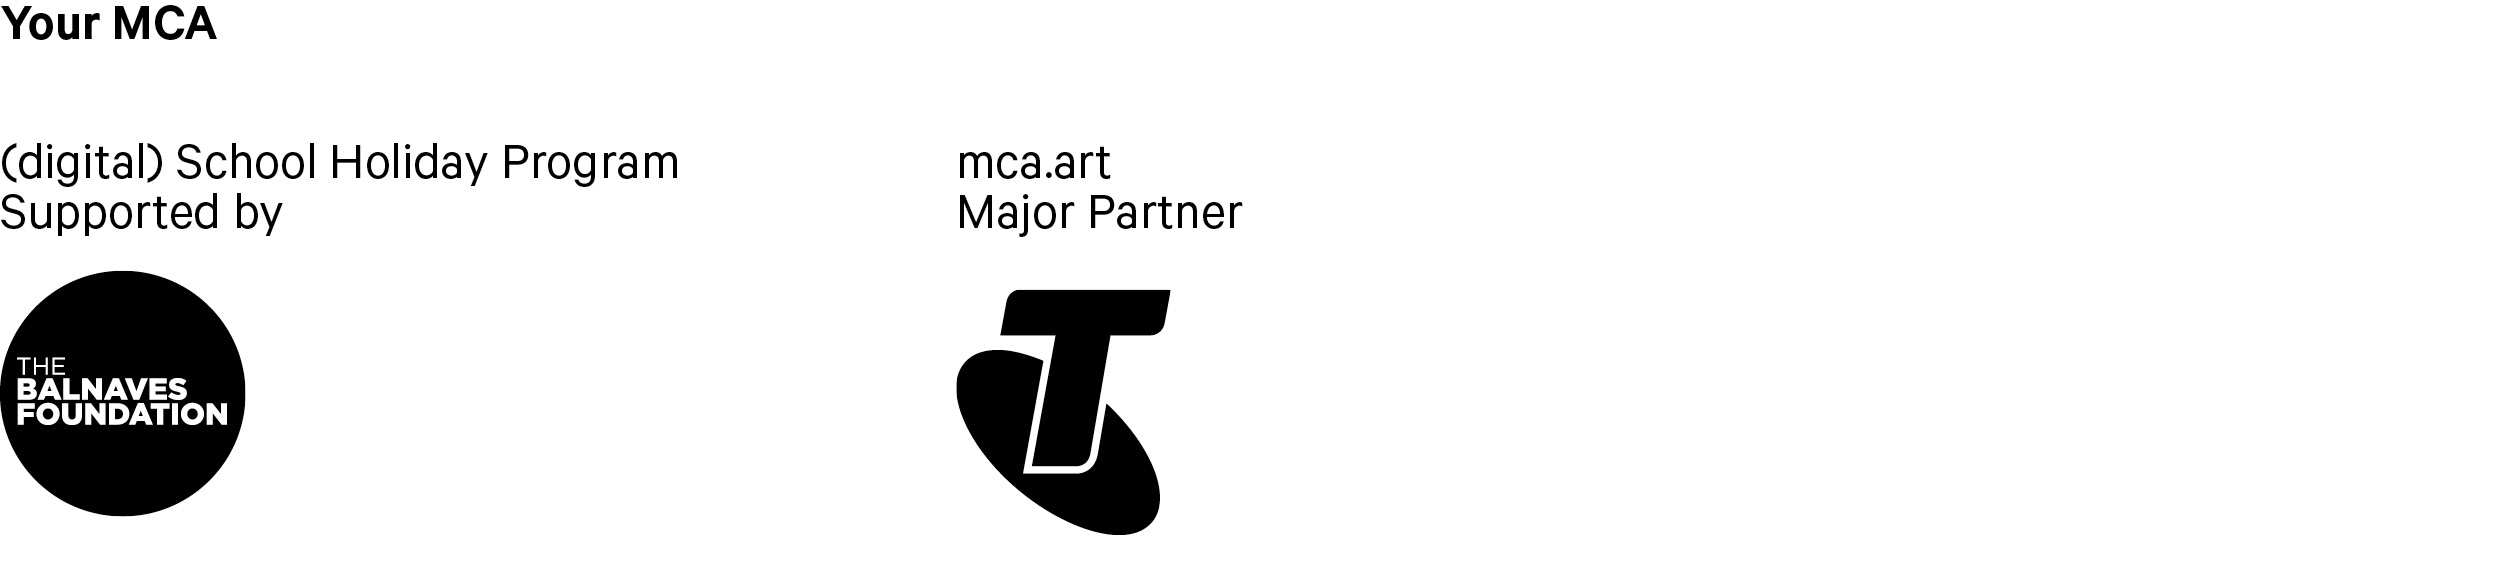 Your MCA is proudly supported by The Balnaves Foundation and Telstra